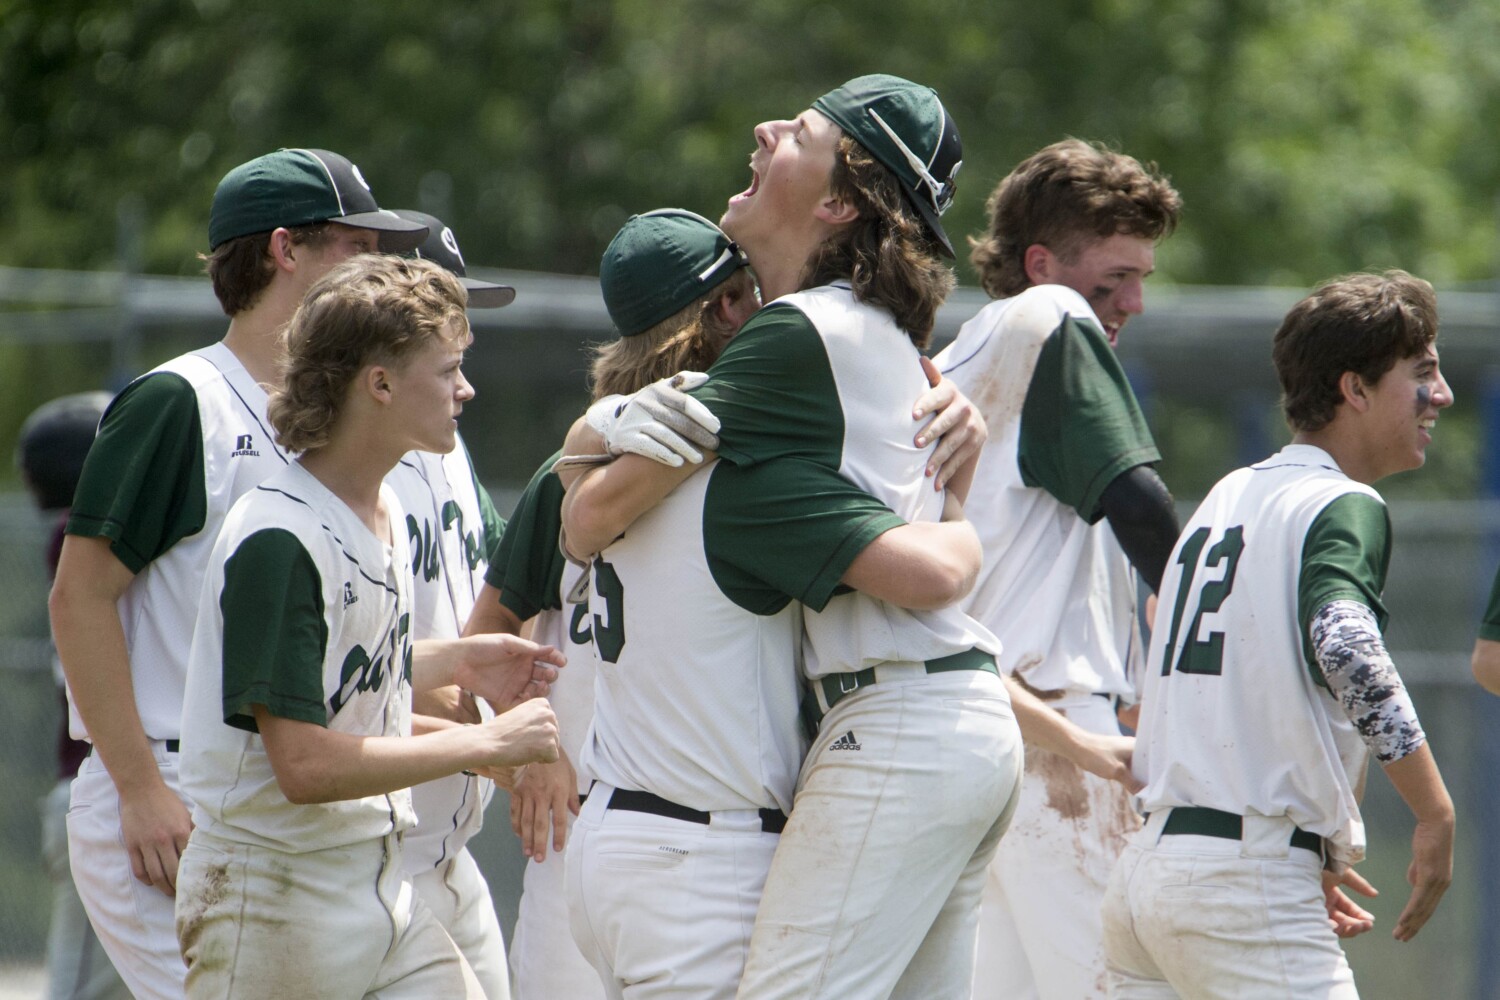 Baseball: Old Town defeats Freeport in Class B title game, 7-3